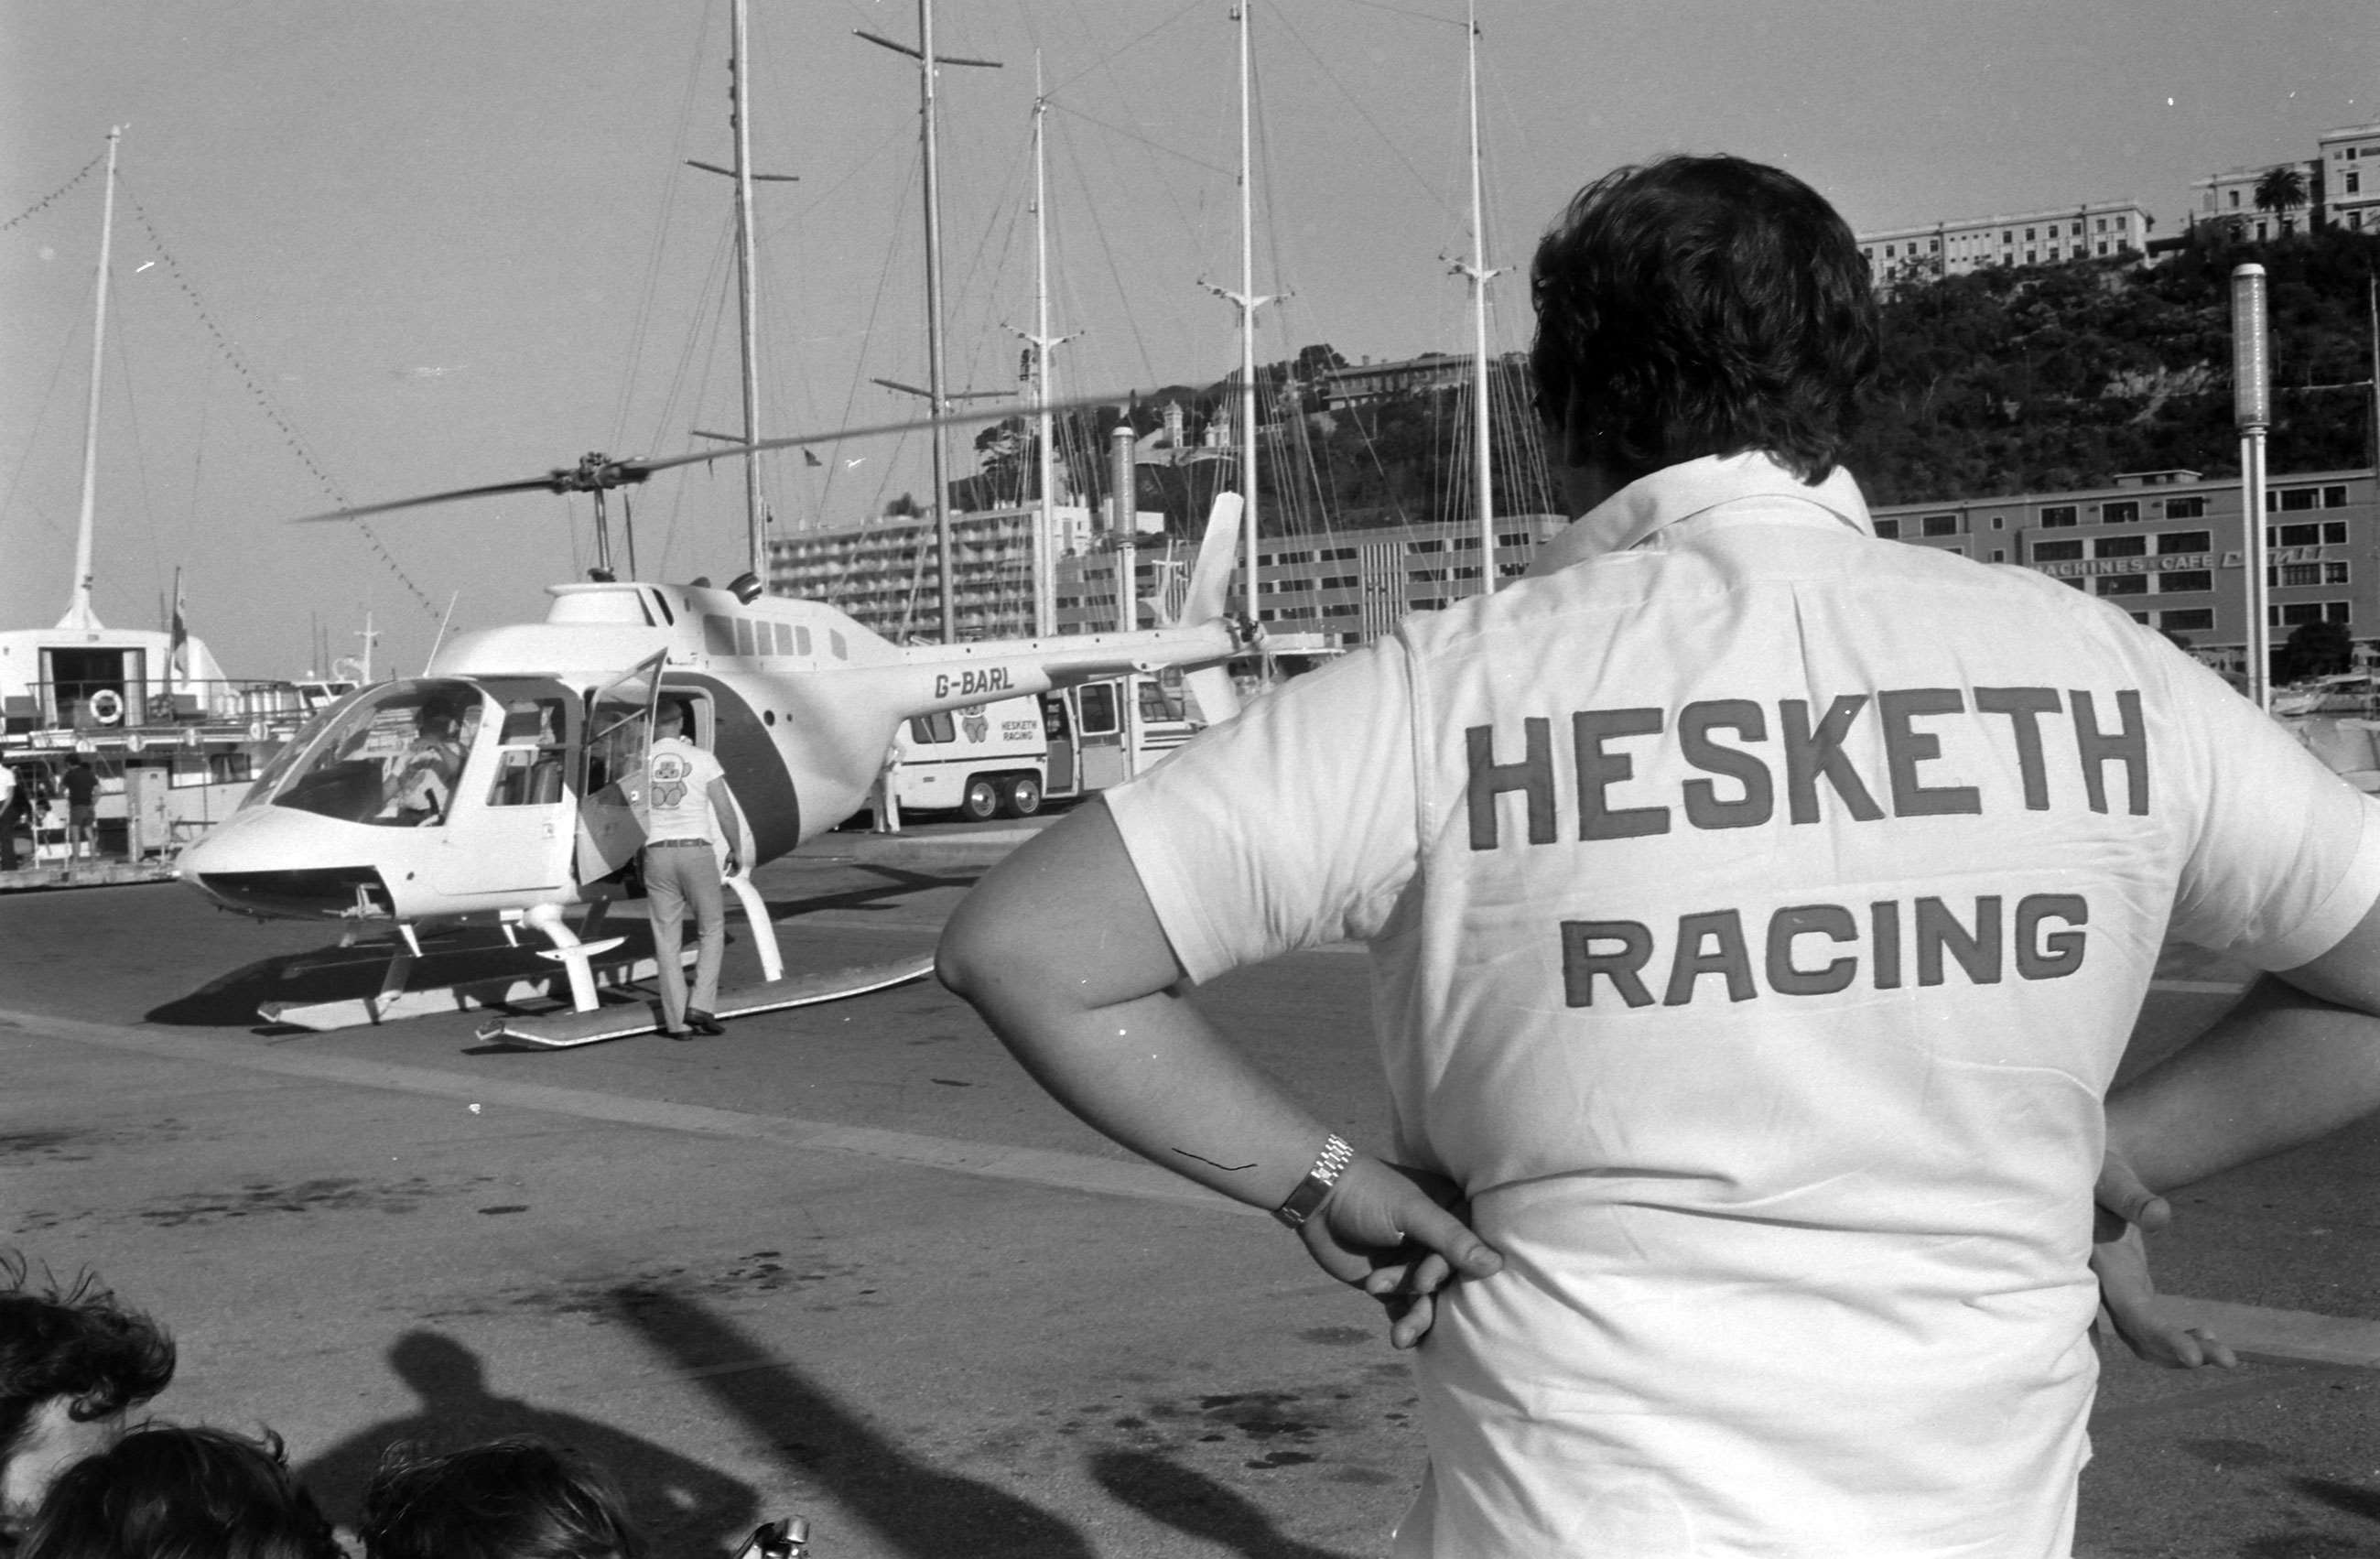 Lord Hesketh admiring his helicopter after the Grand Prix. 